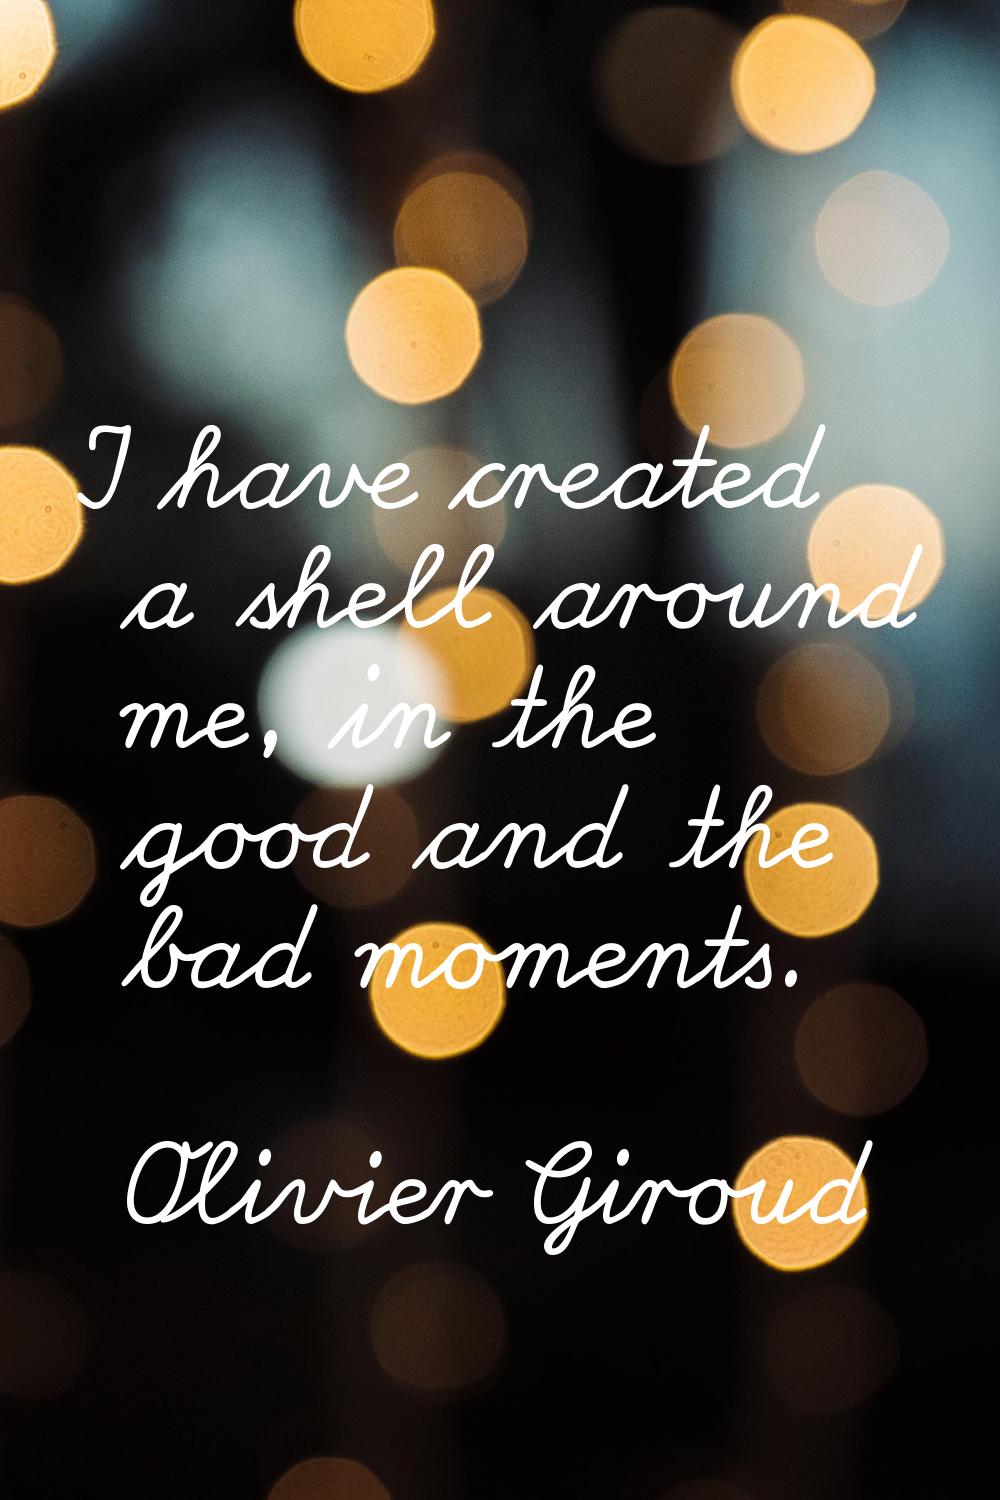 I have created a shell around me, in the good and the bad moments.